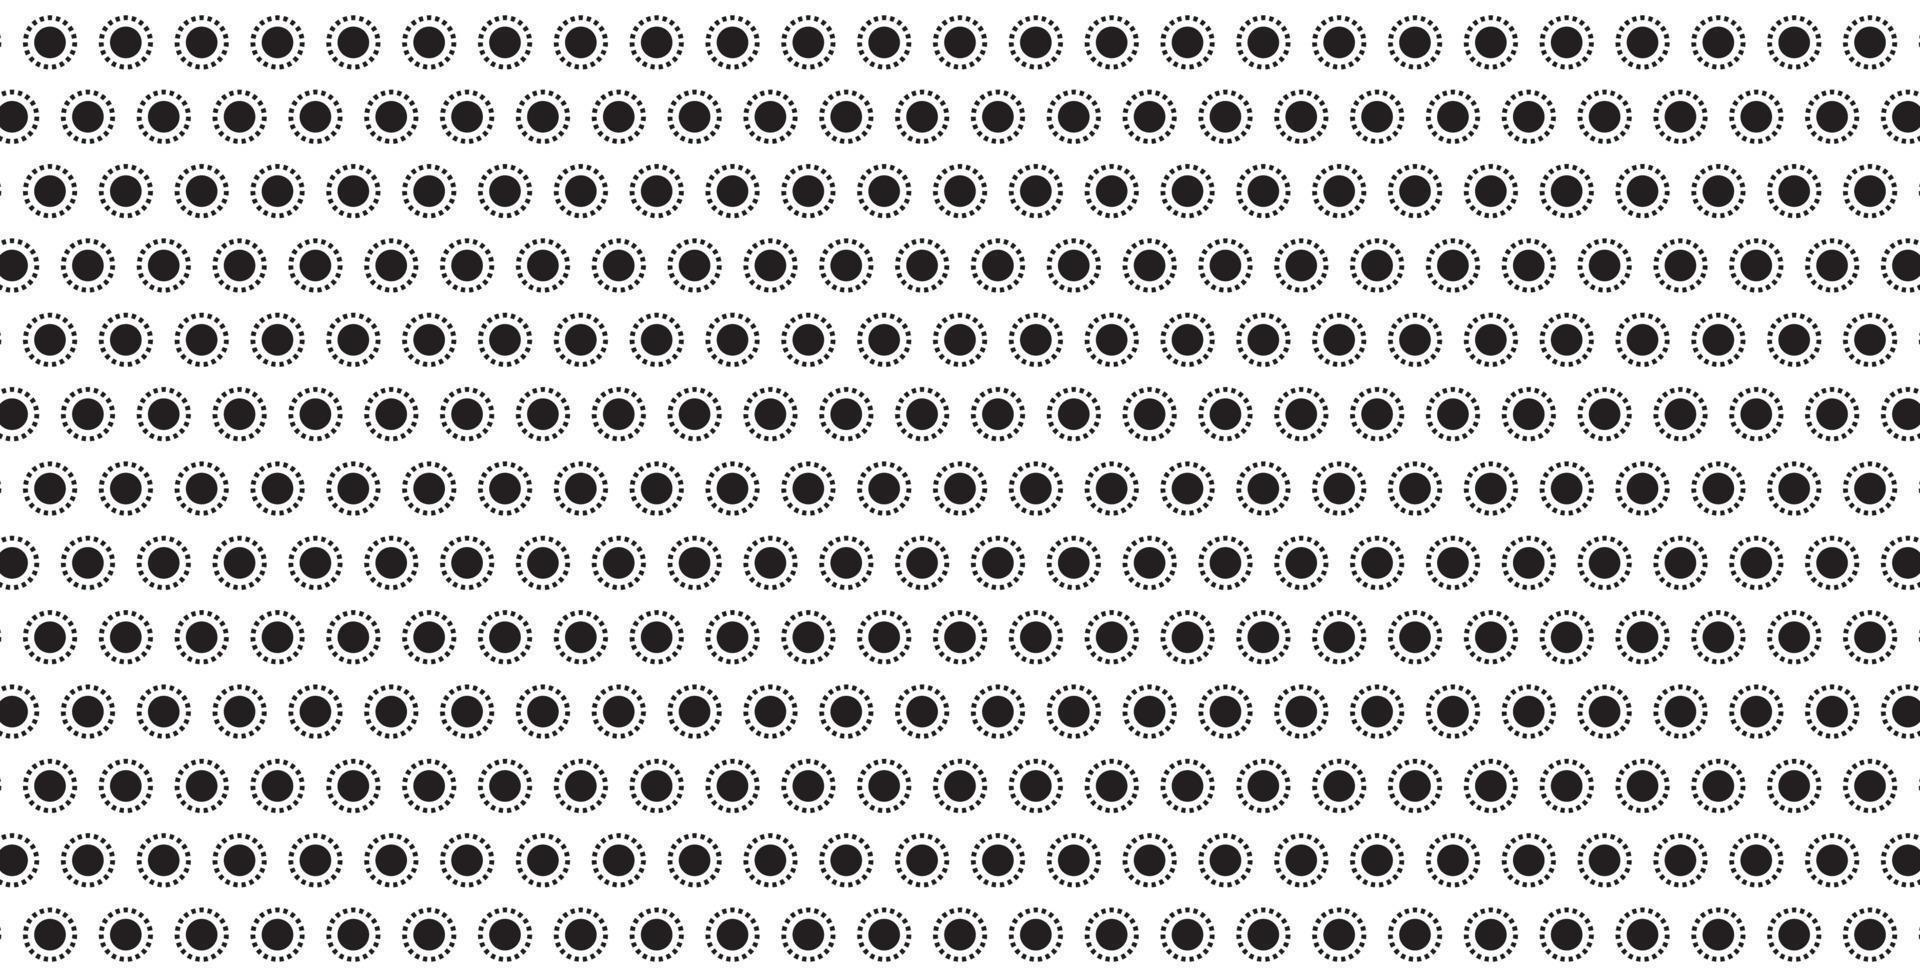 polkadot black and white texture background pattern vector